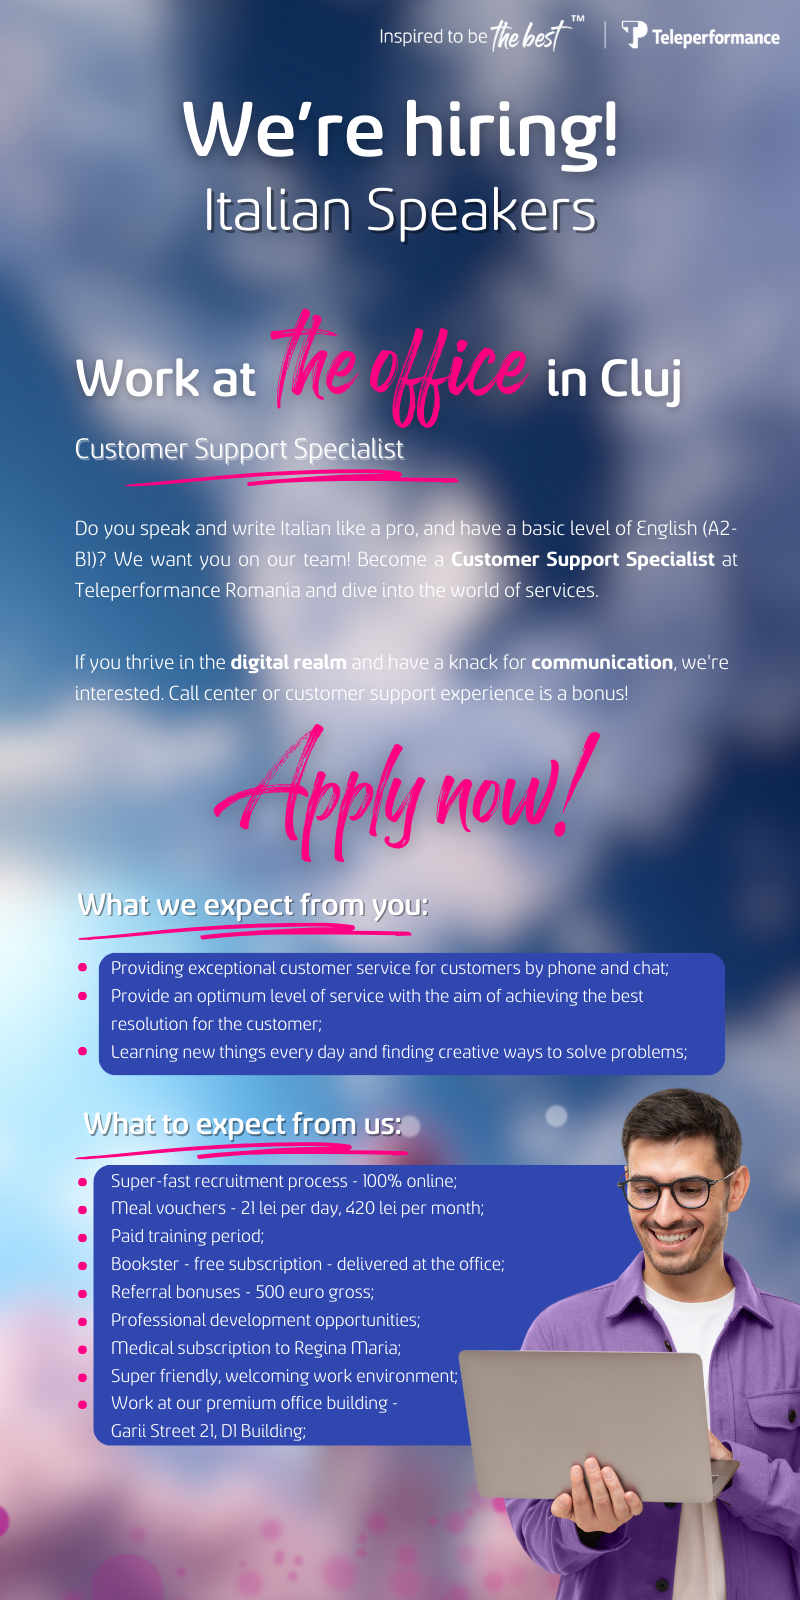 Customer Support agent ITALIAN SPEAKERS - ON SITE - CLUJ